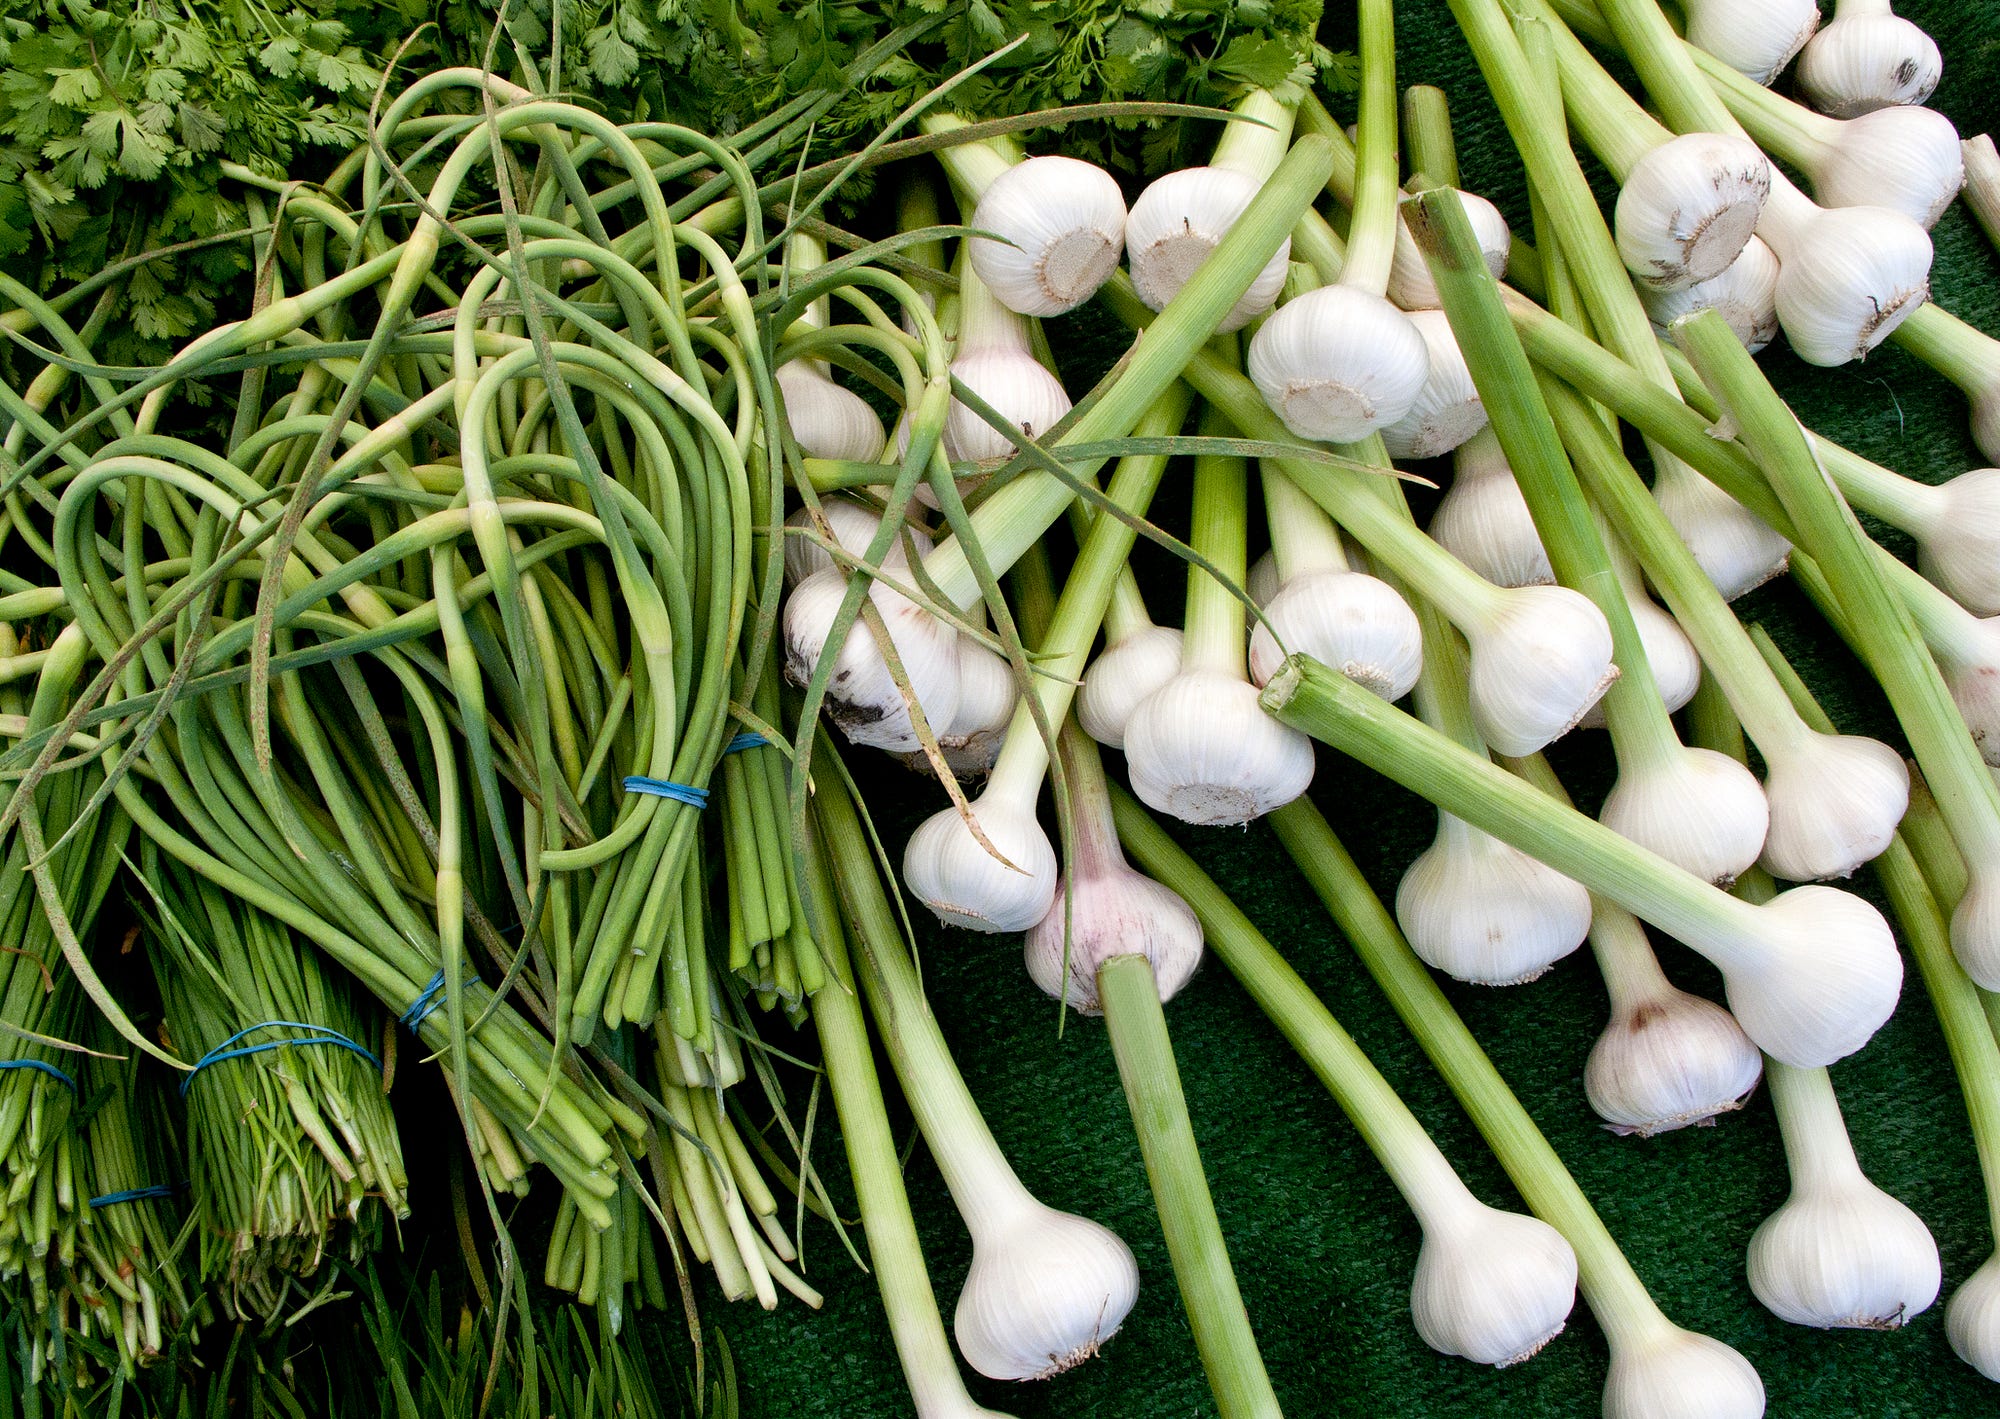 How to Use Green Onions and Get the Most Out of This Tasty Veggie